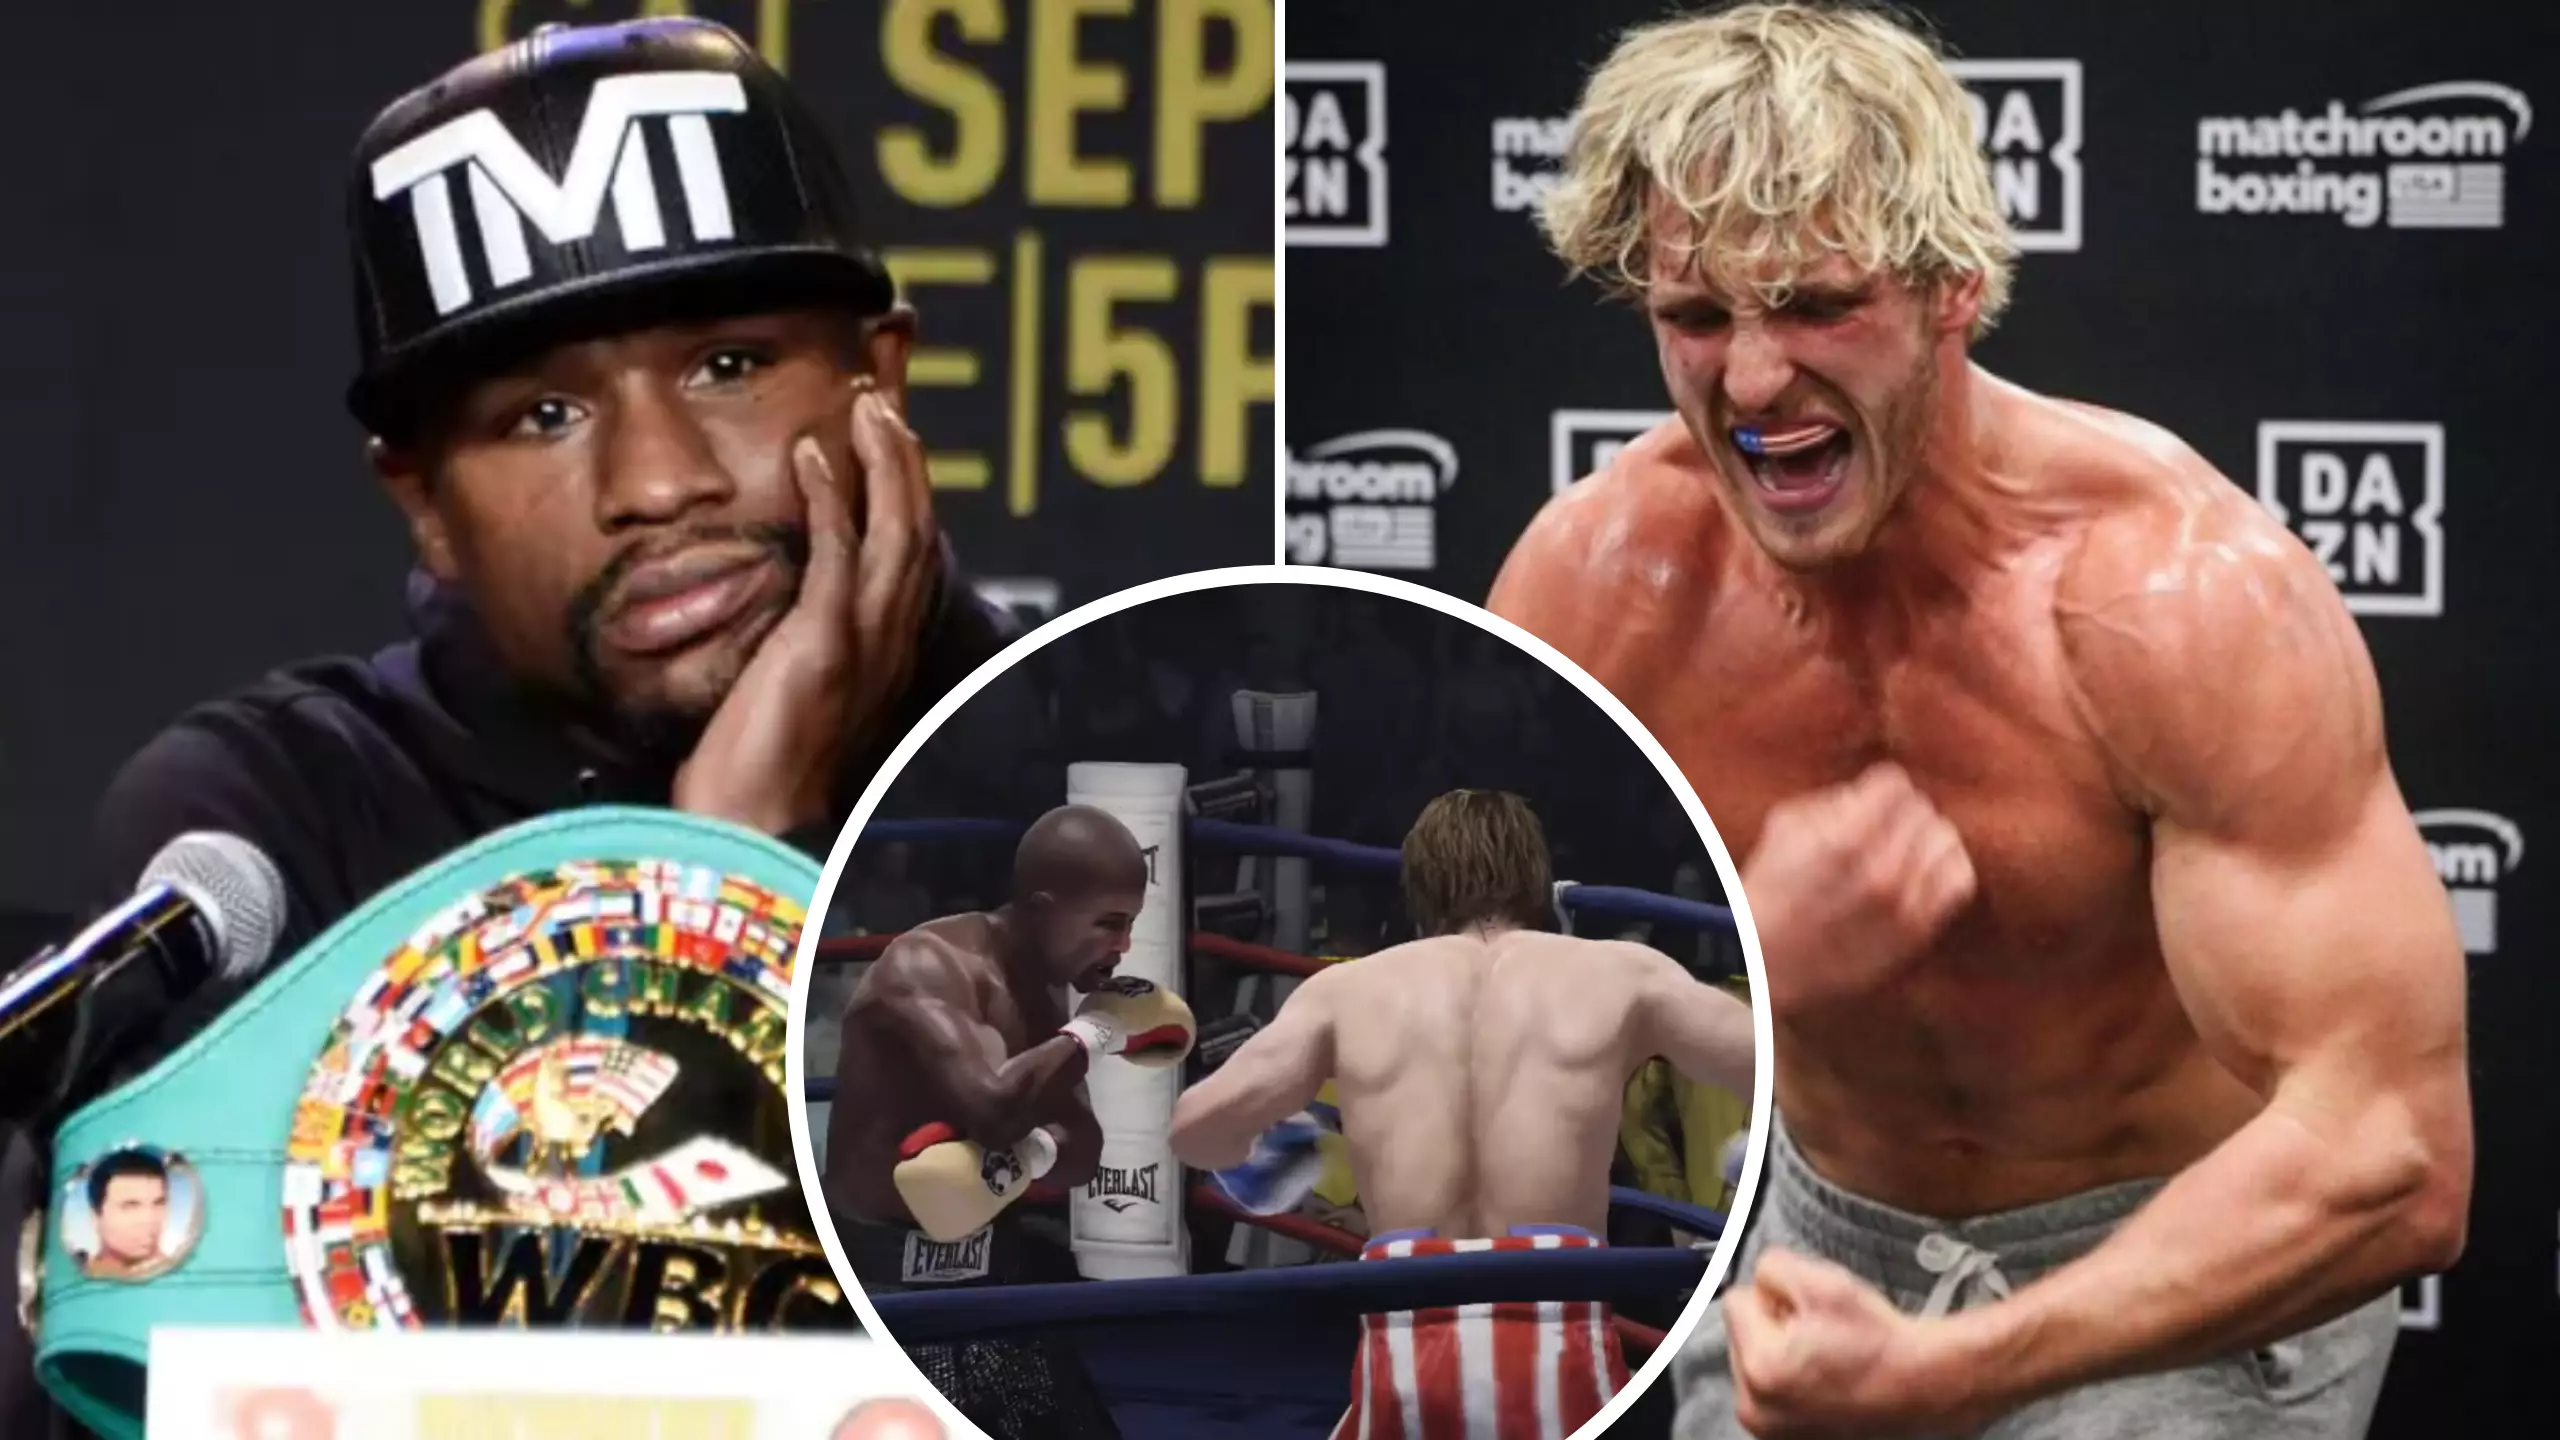 Floyd Mayweather Vs Logan Paul Simulated On Fight Night Champion, Ends In Brutal Knockout